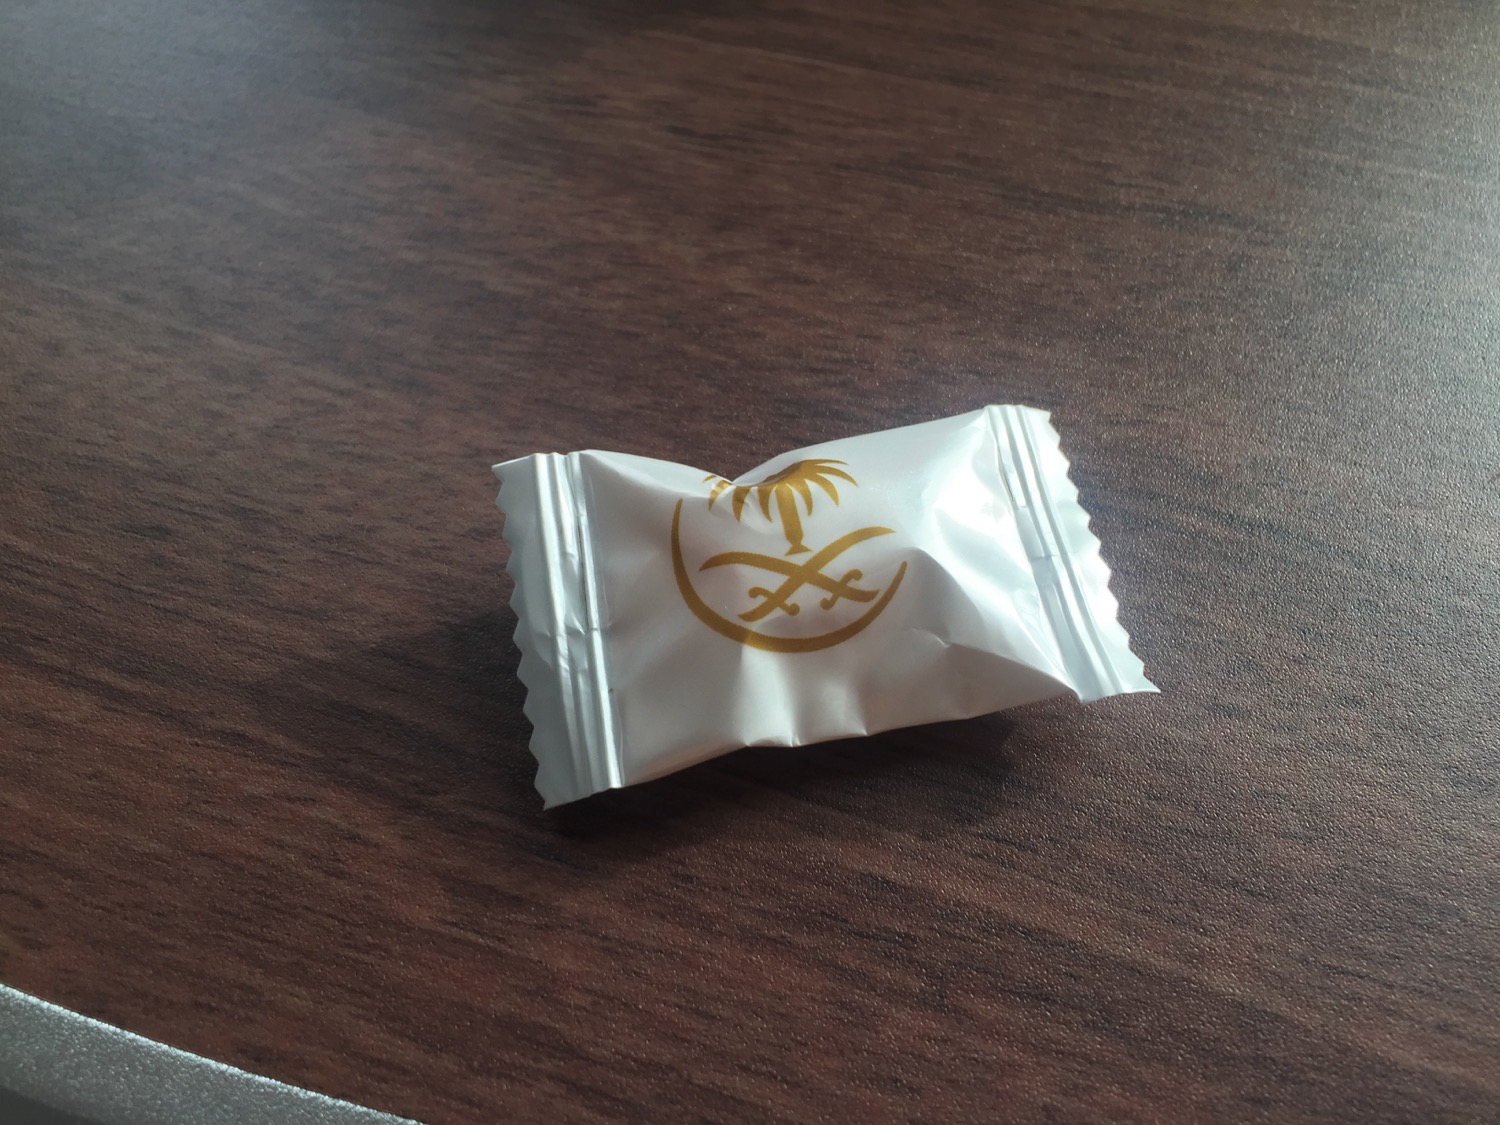 A small white package with a golden logo